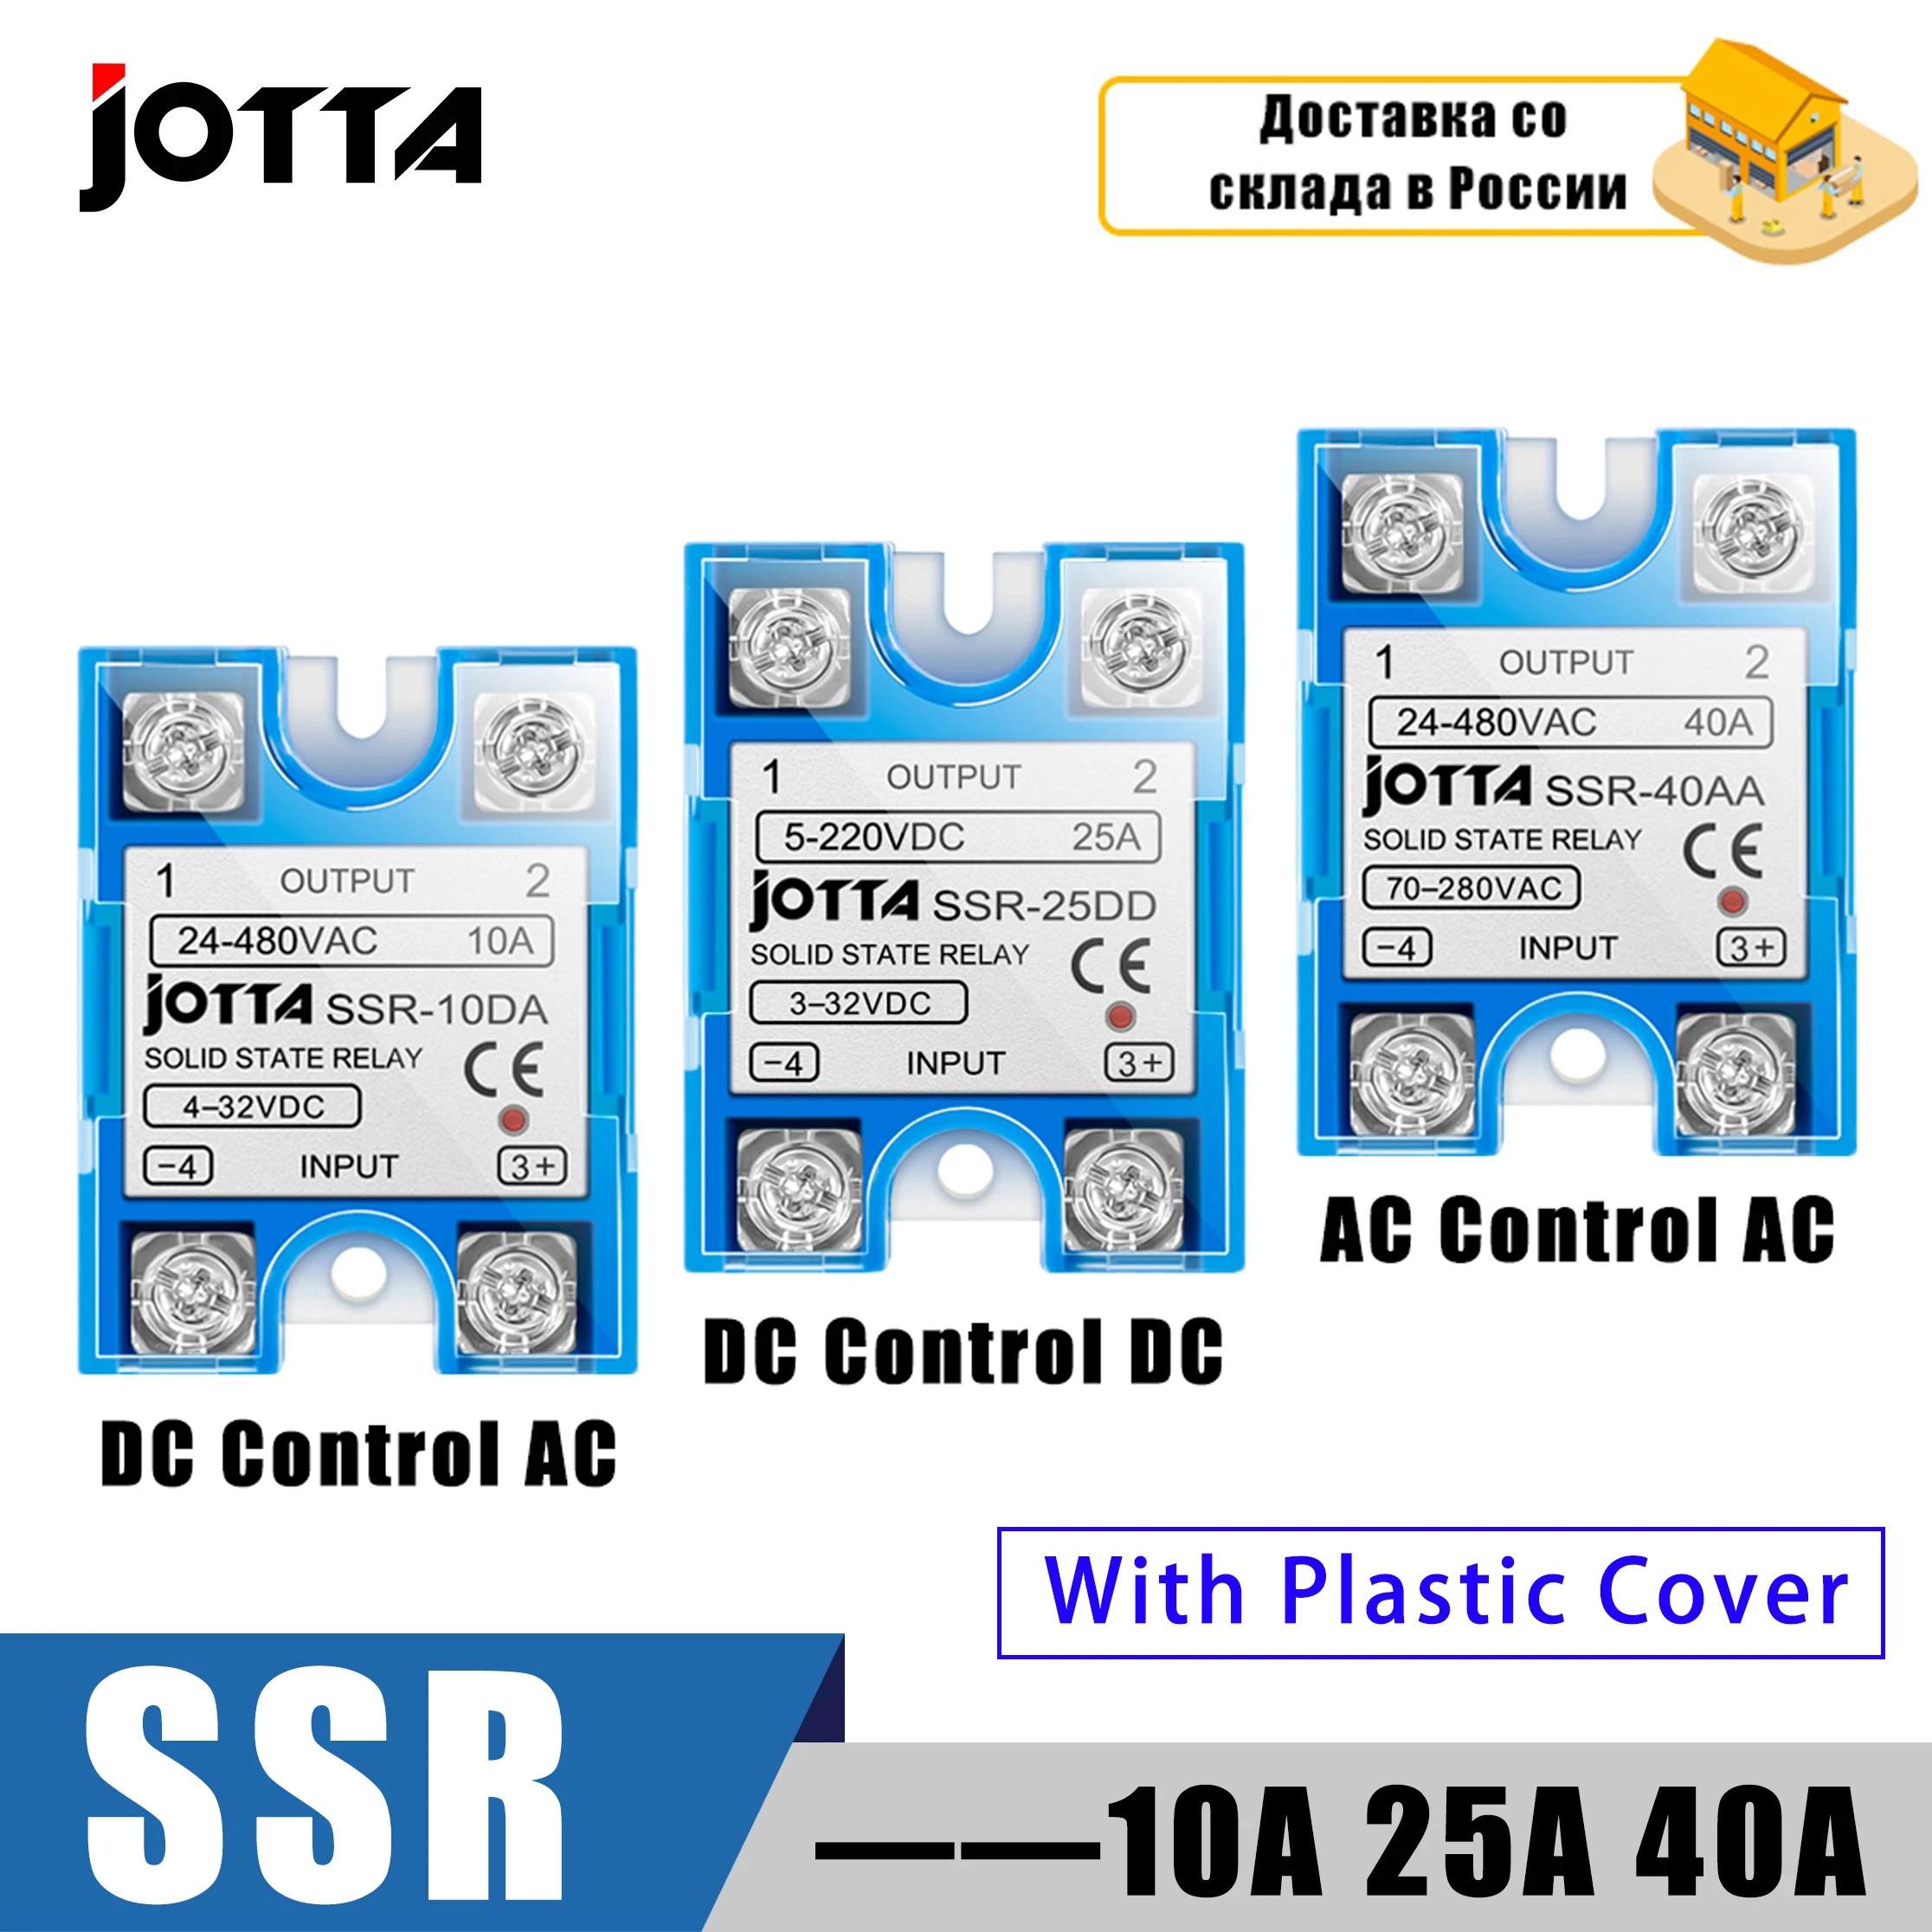 SSR-25DA SSR-40DA SSR-40AA SSR-40DD SSR 10A 25A 40A 60A 80A 100A DD DA AA  Solid State Relay Module for PID Temperature Control